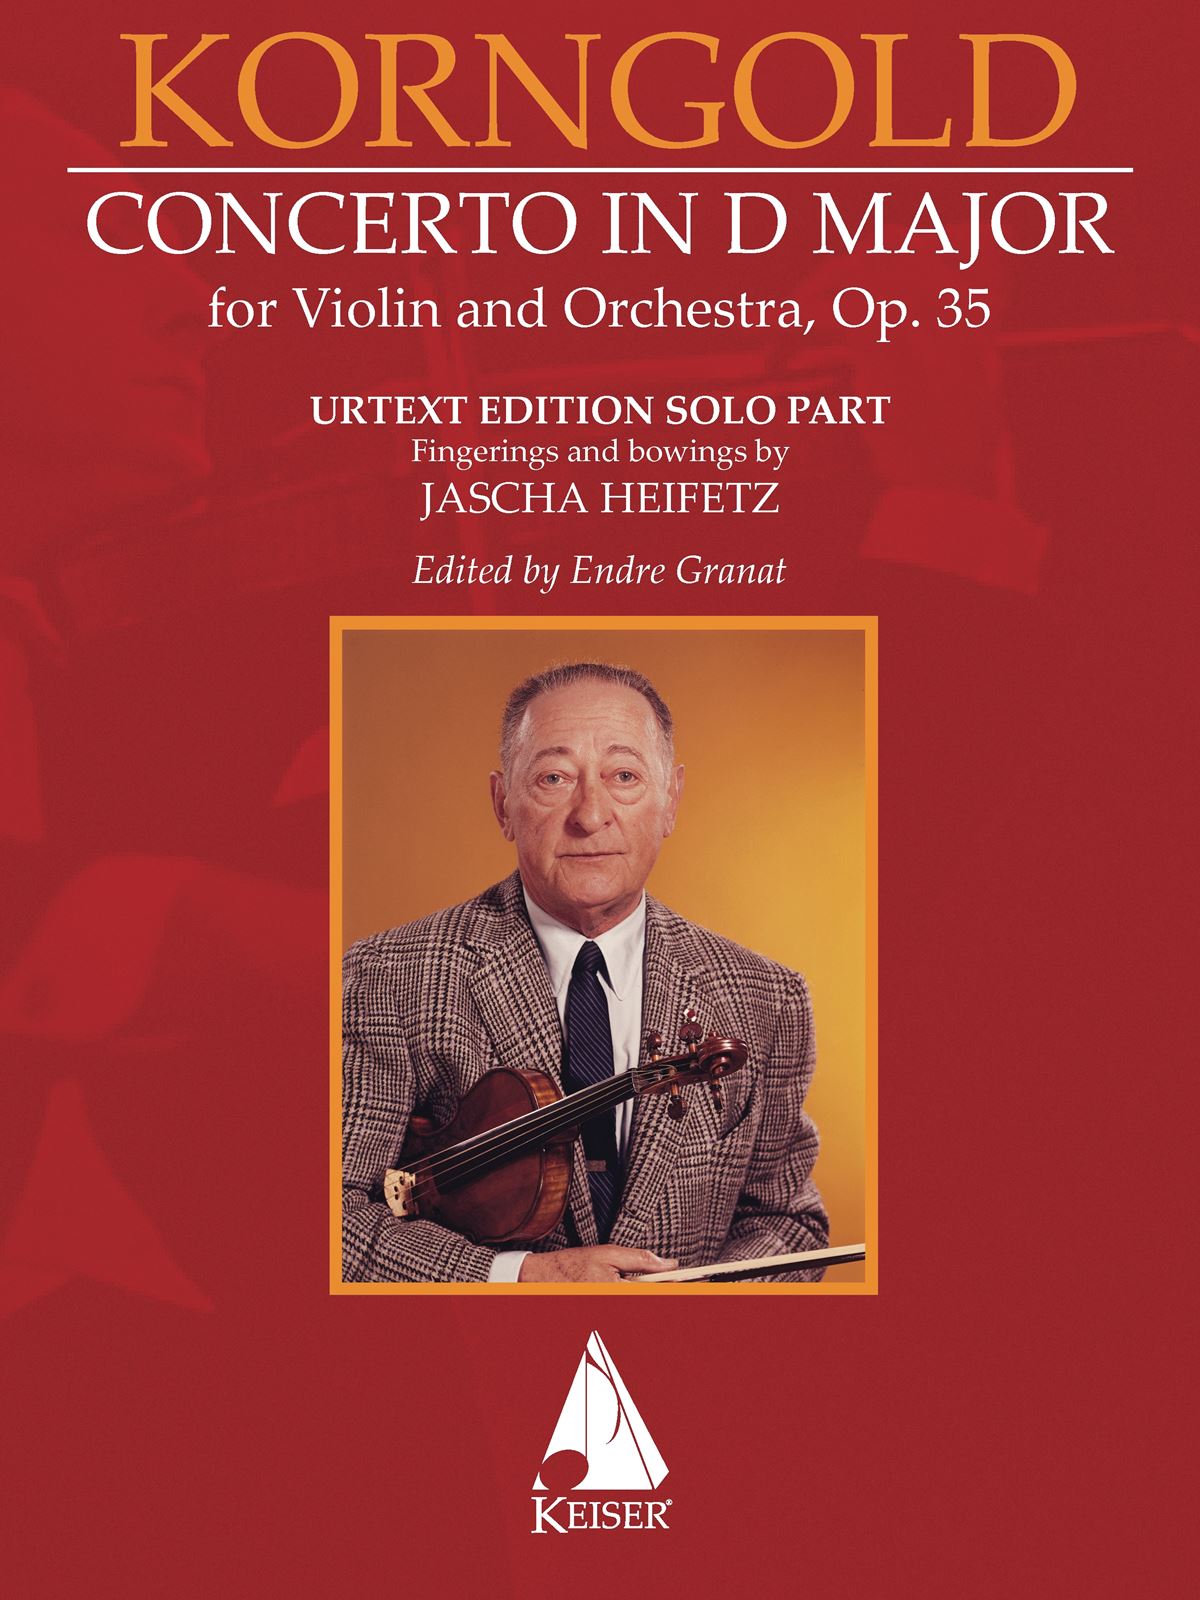 Erich Wolfgang Korngold: Violin Concerto in D Major  Op. 35: Orchestra and Solo: